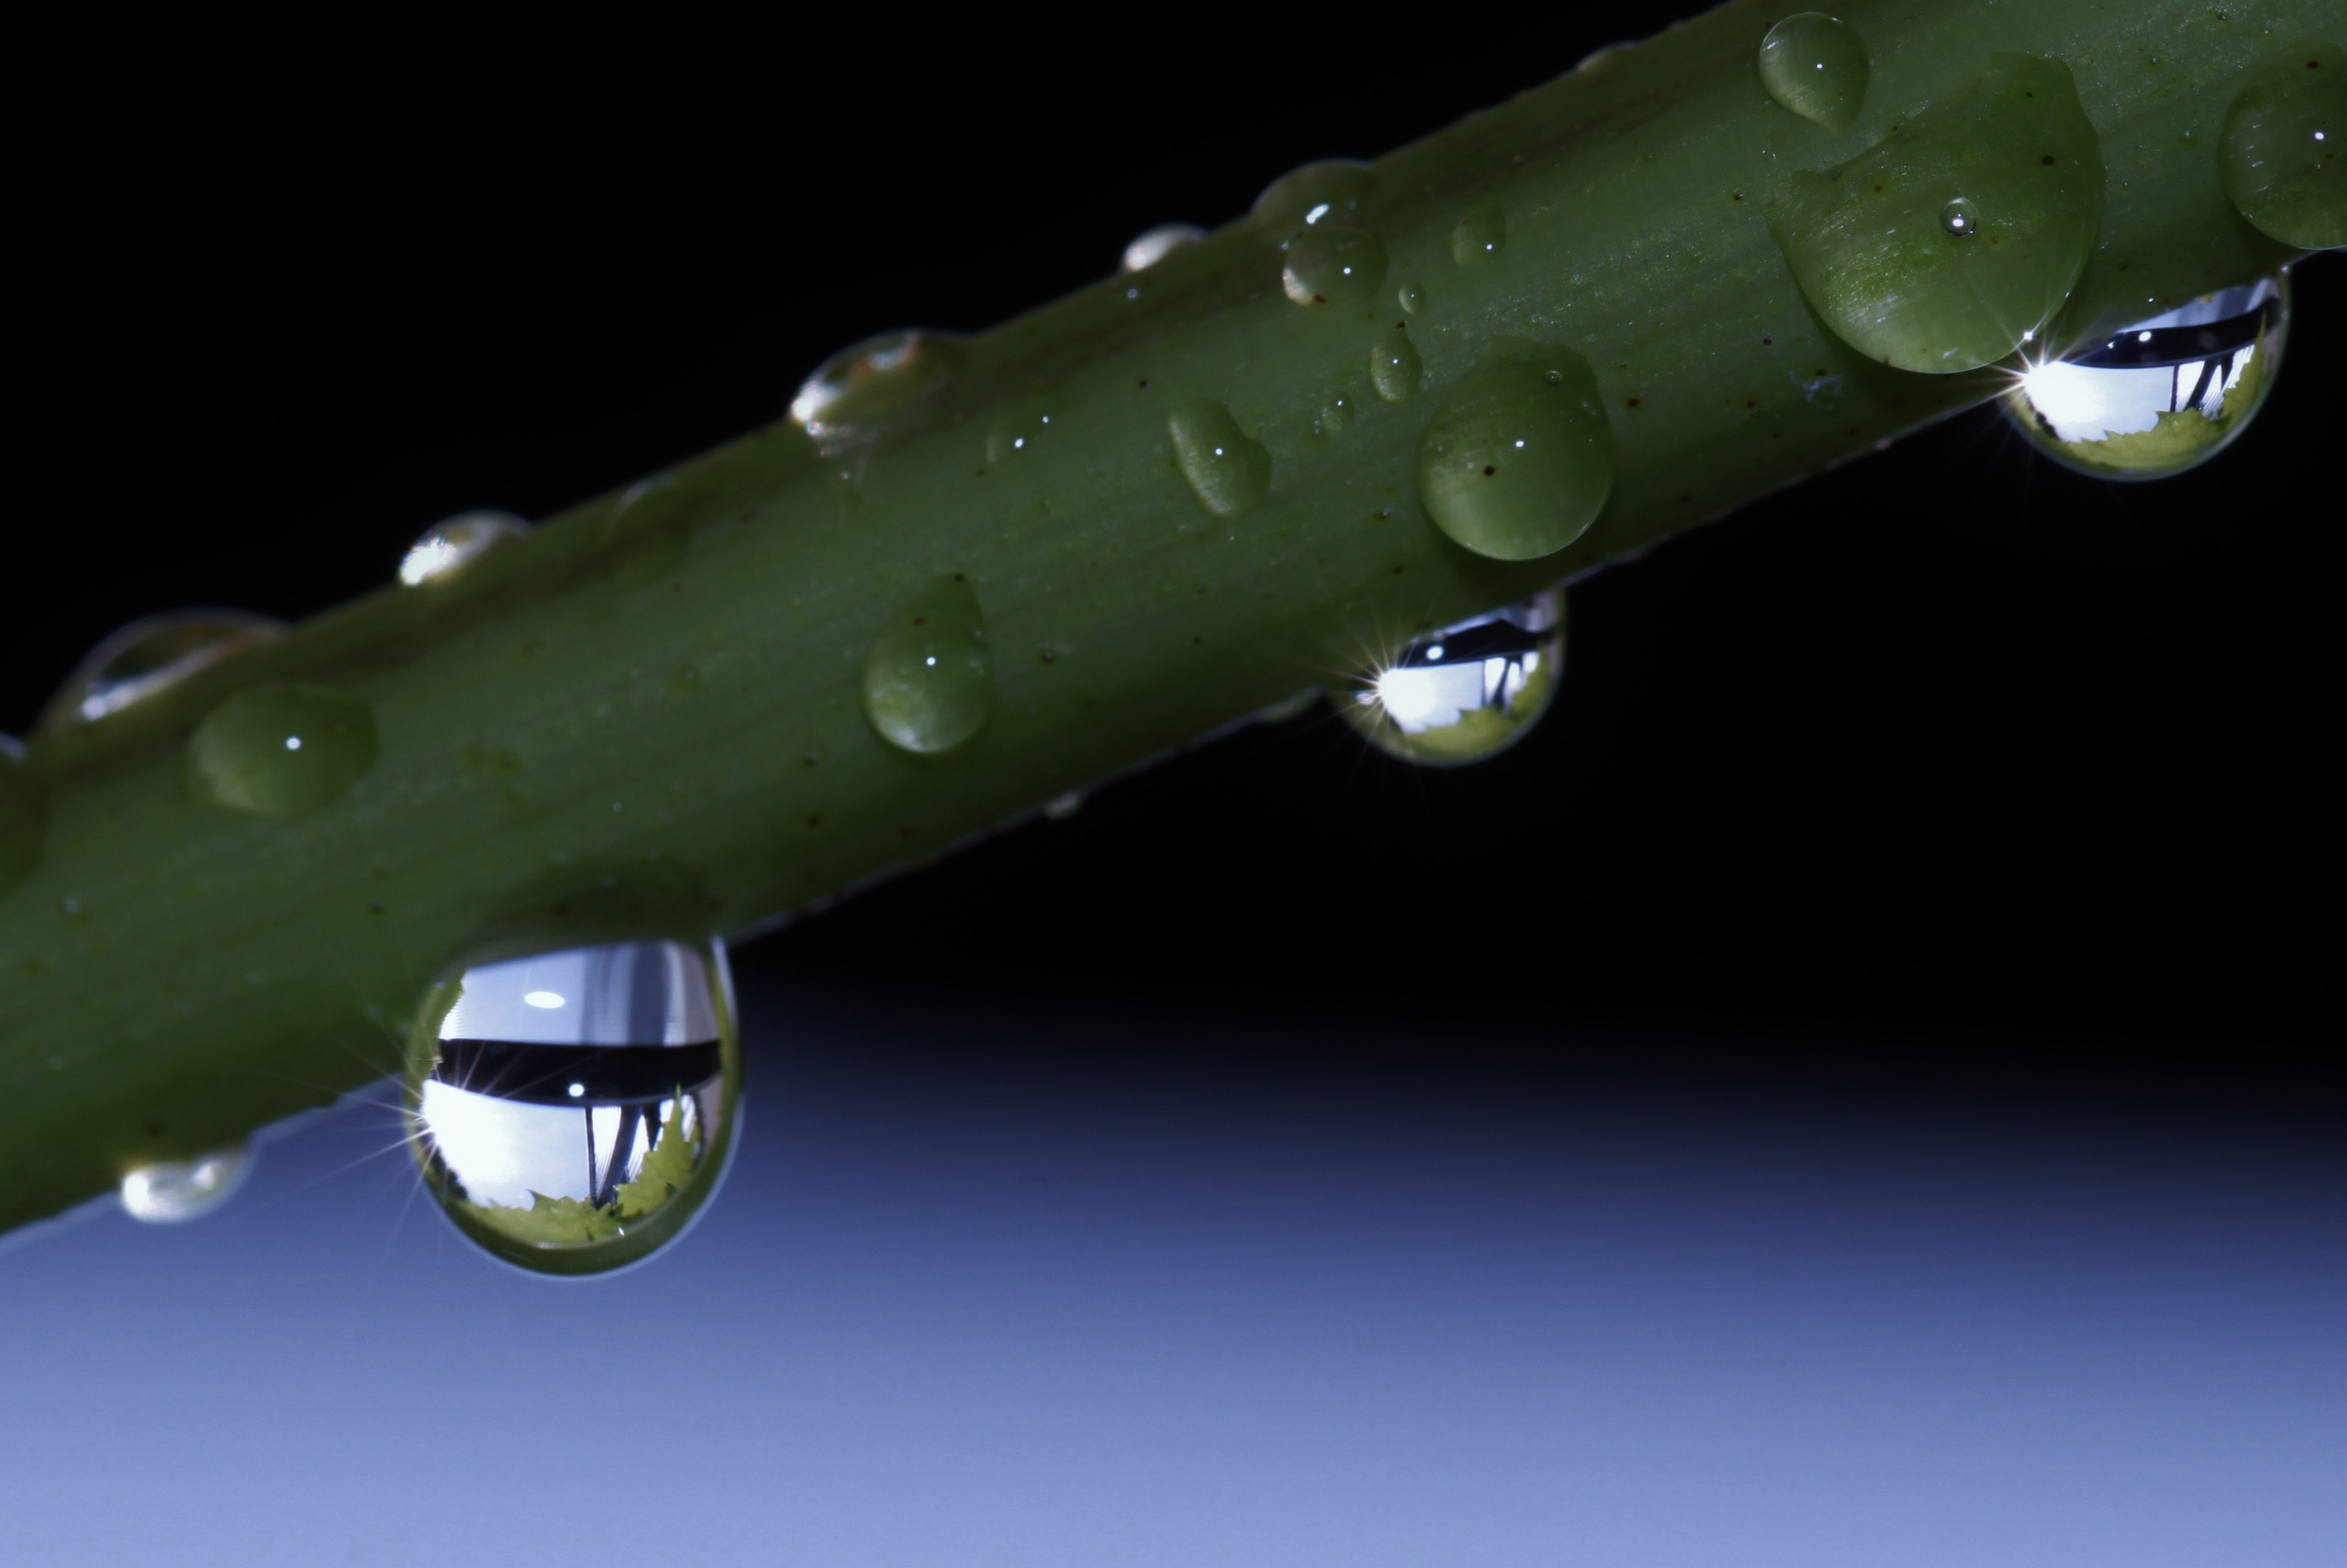 2560x1440 Wallpaper Shallow Focus Photography Of Water Drops Peakpx